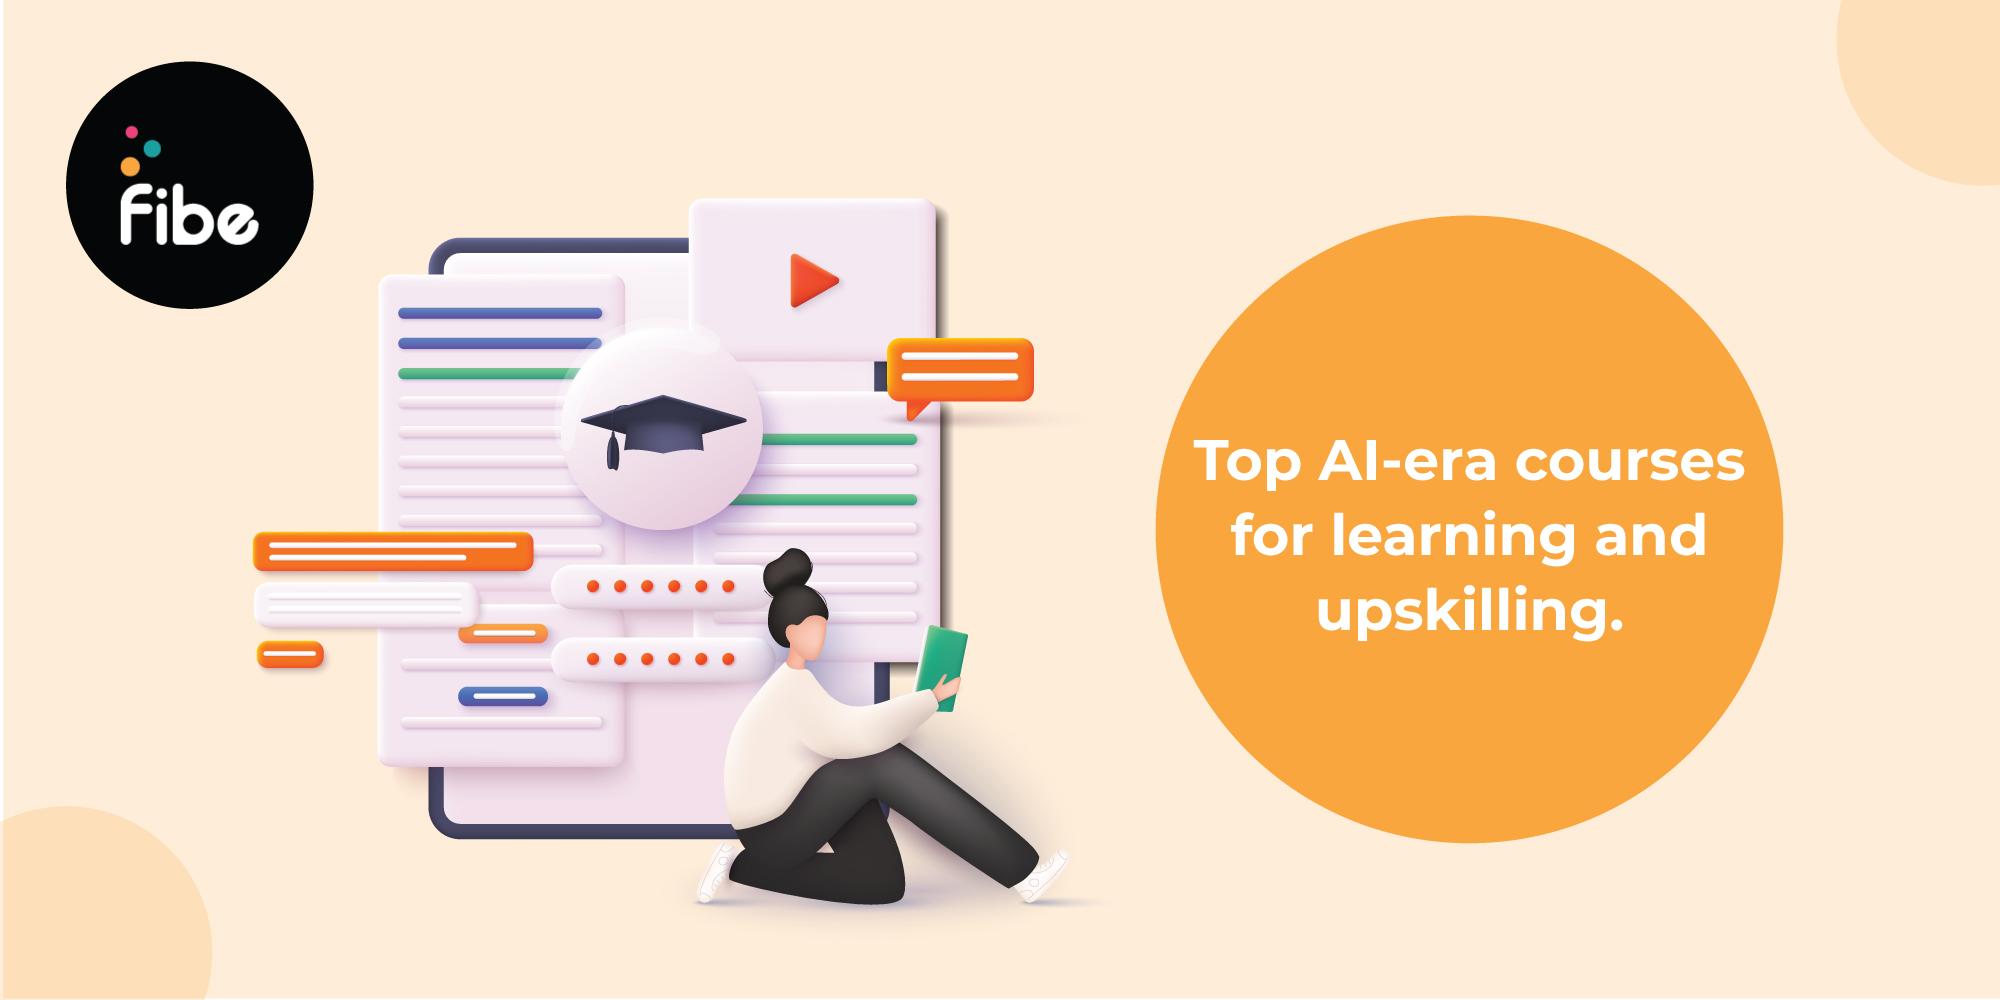 Top 7 Courses to learn and Upskill in the AI Era